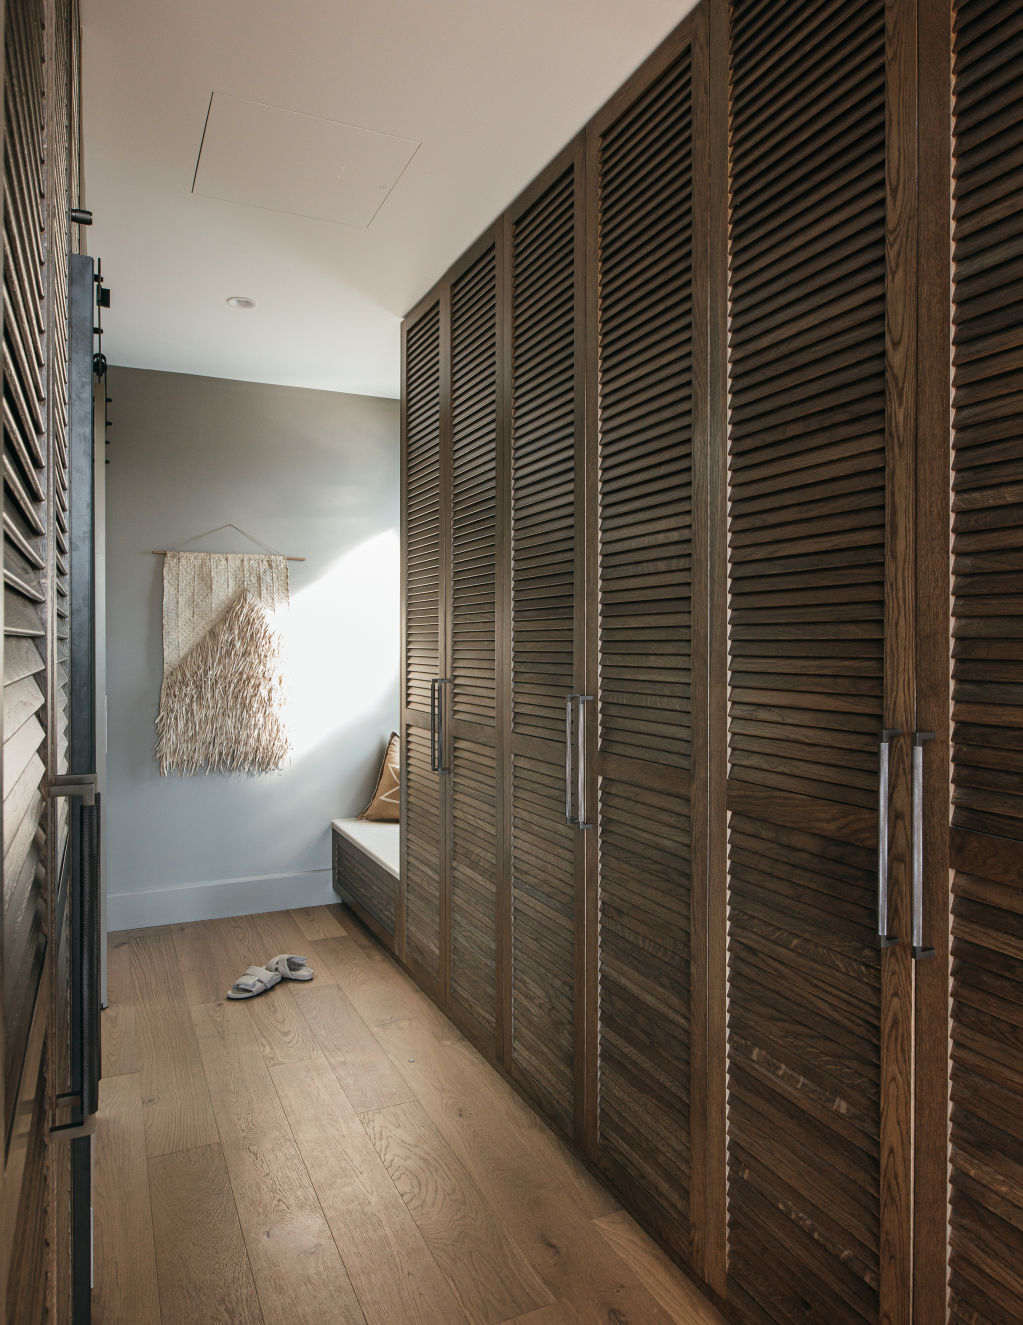 The walk-in wardrobe in House Two features aged American oak. Photo: Grace Picot